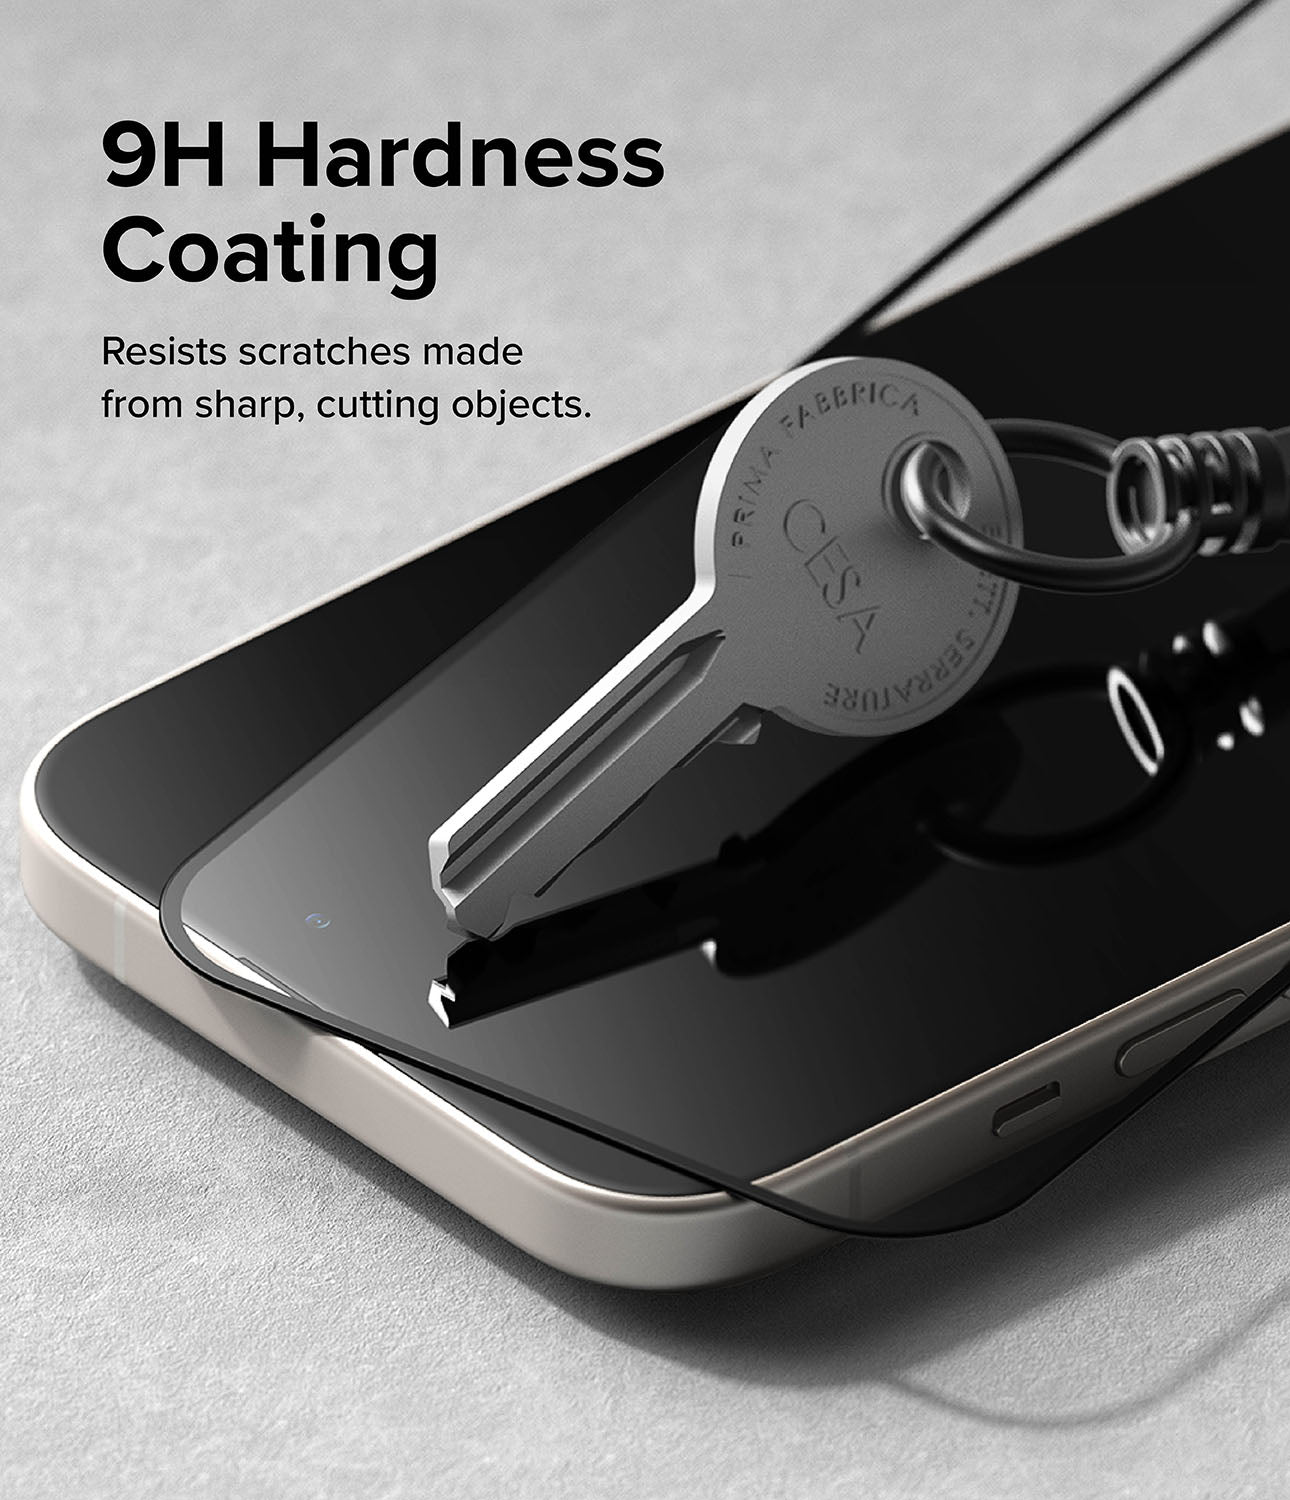 iPhone 15 Screen Protector | Full Cover Glass - 9H Hardness Coating. Resists scratches made from sharp, cutting objects.